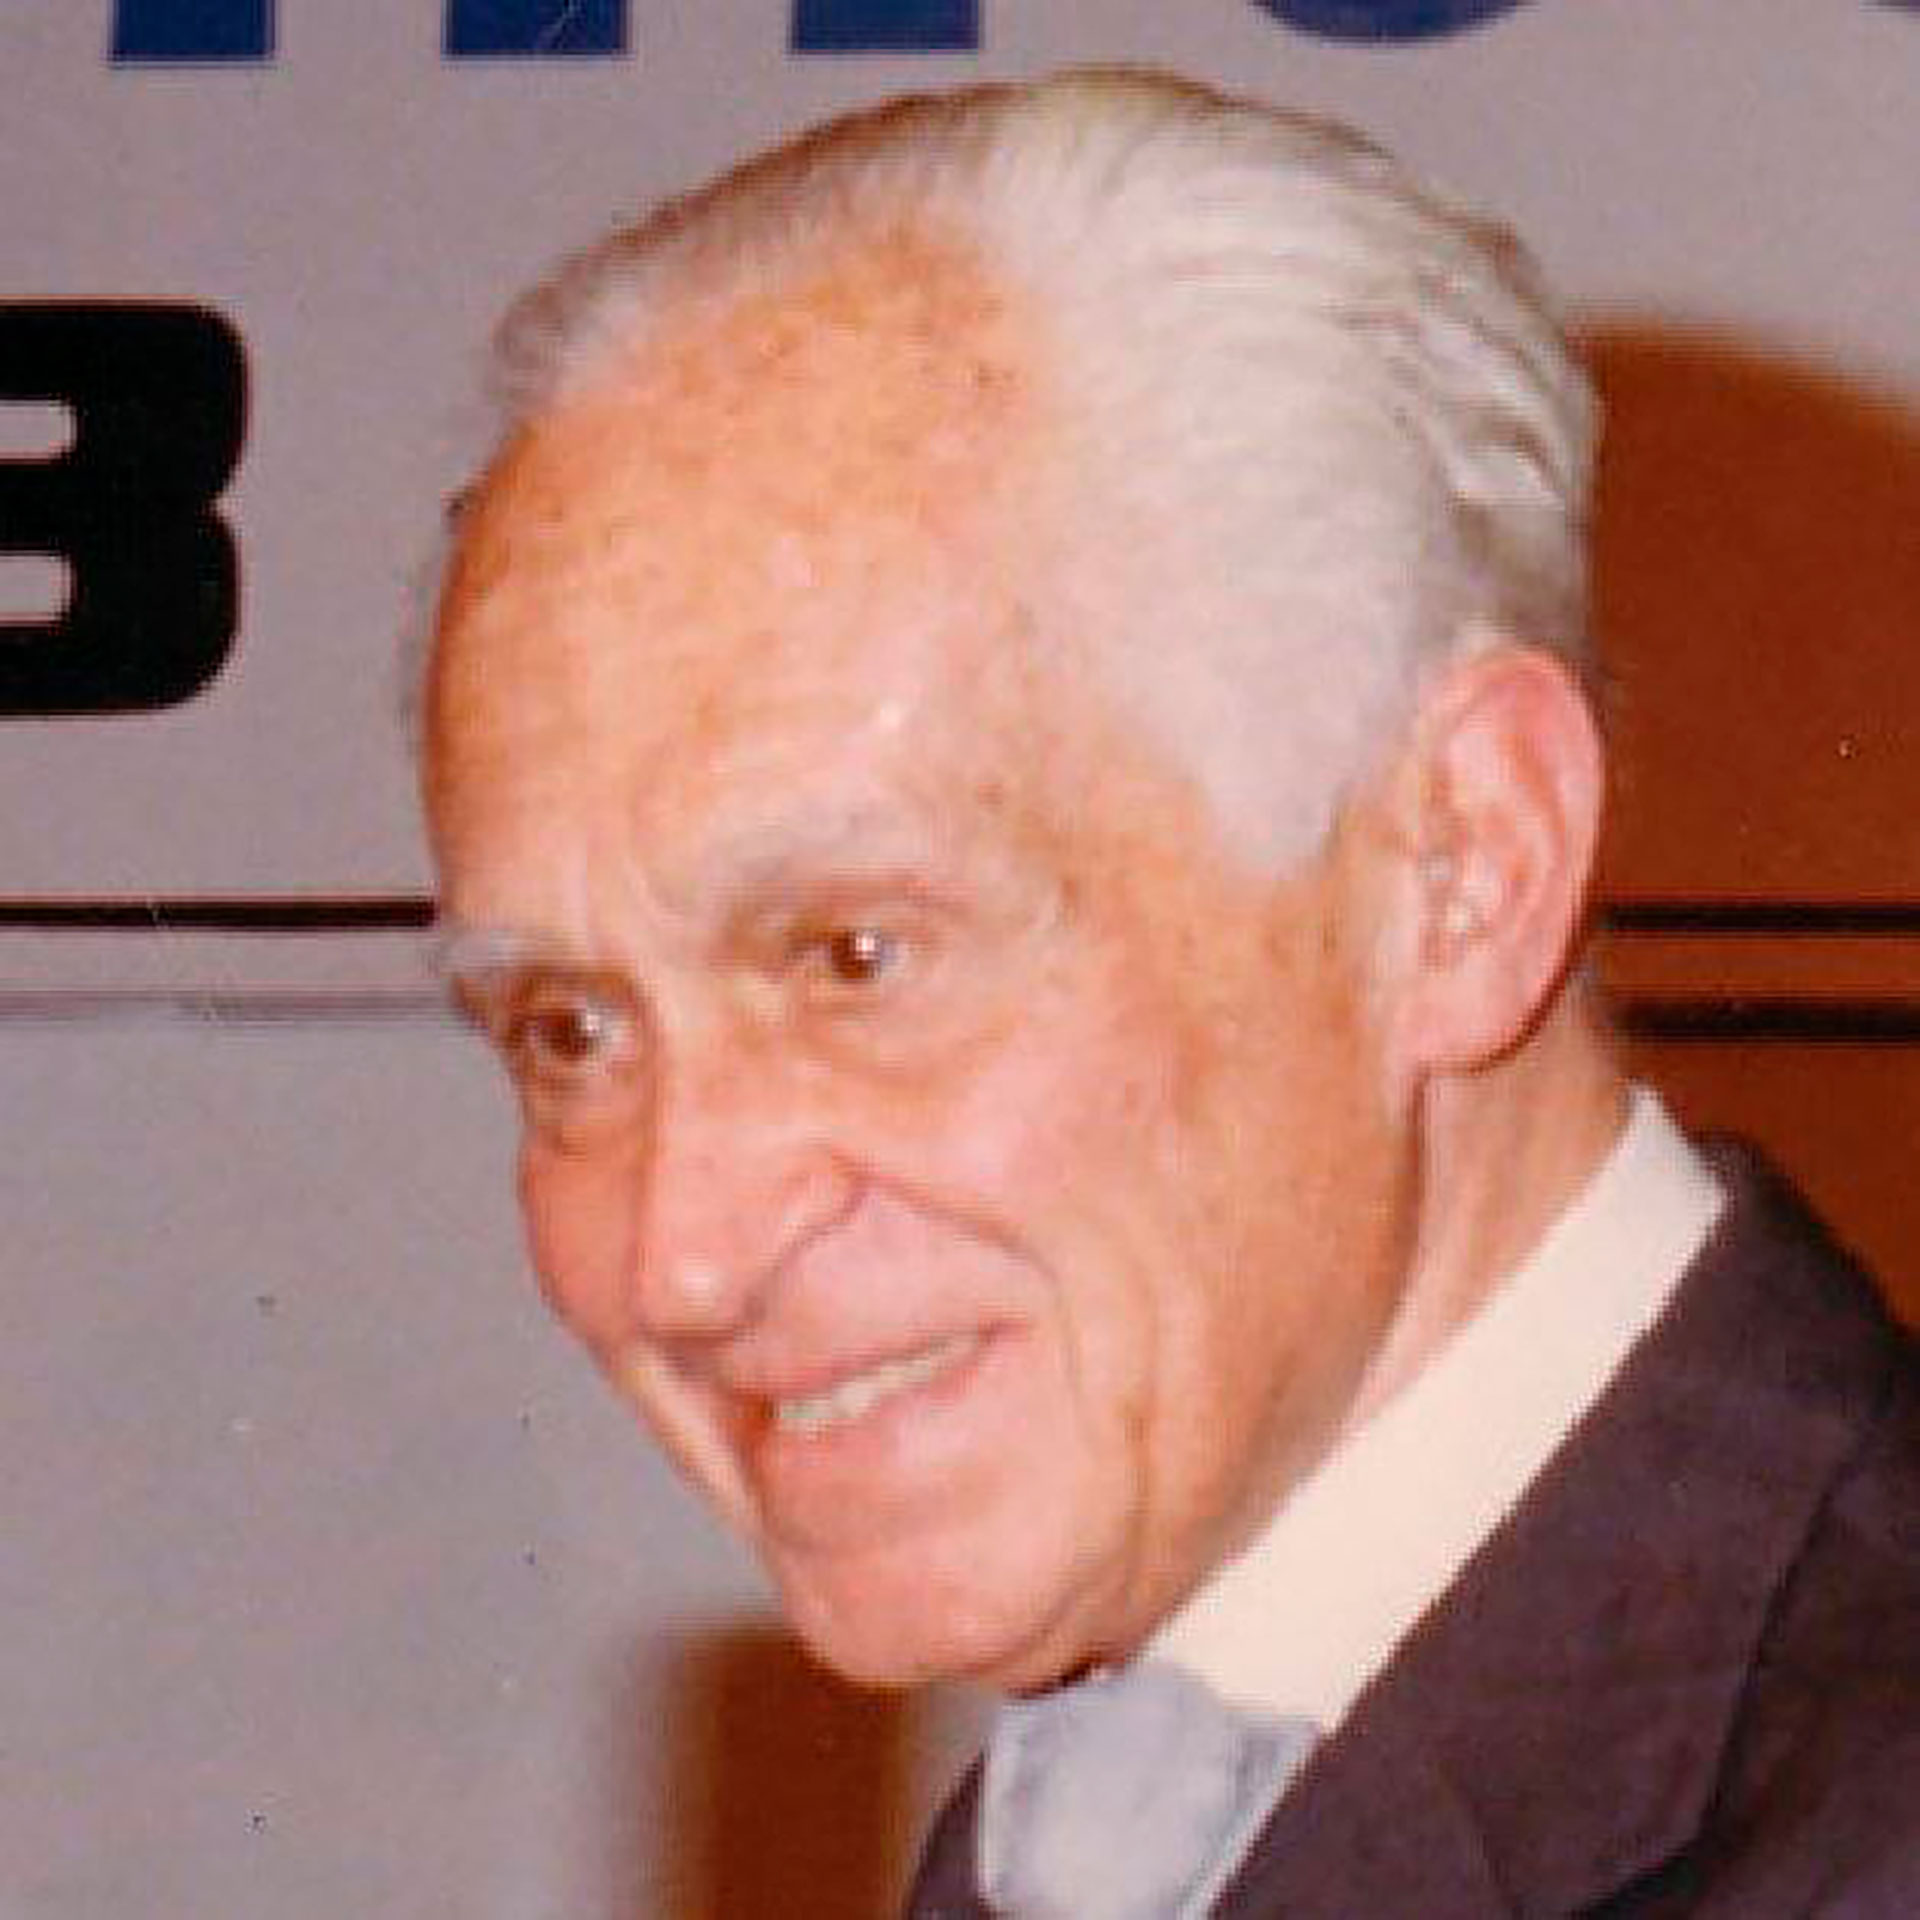 He was a promoter of the Colegio Nacional de Buenos Aires and Carlos Pellegrini, dependent on UBA, due to the mix.  It was one of the toughest battles they had to face. 